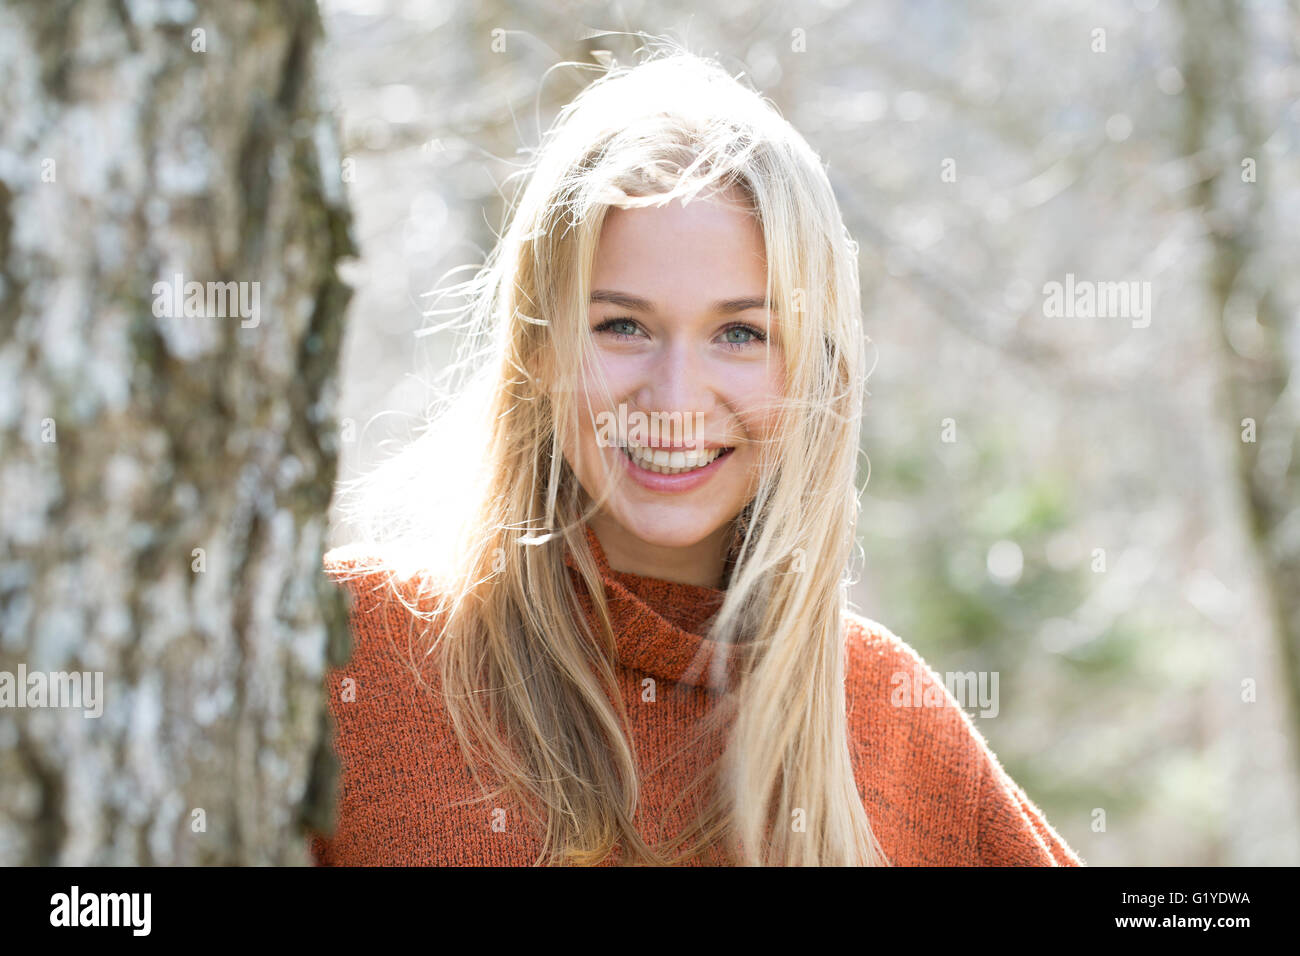 Portrait of a laughing young woman with long blond hair Stock Photo